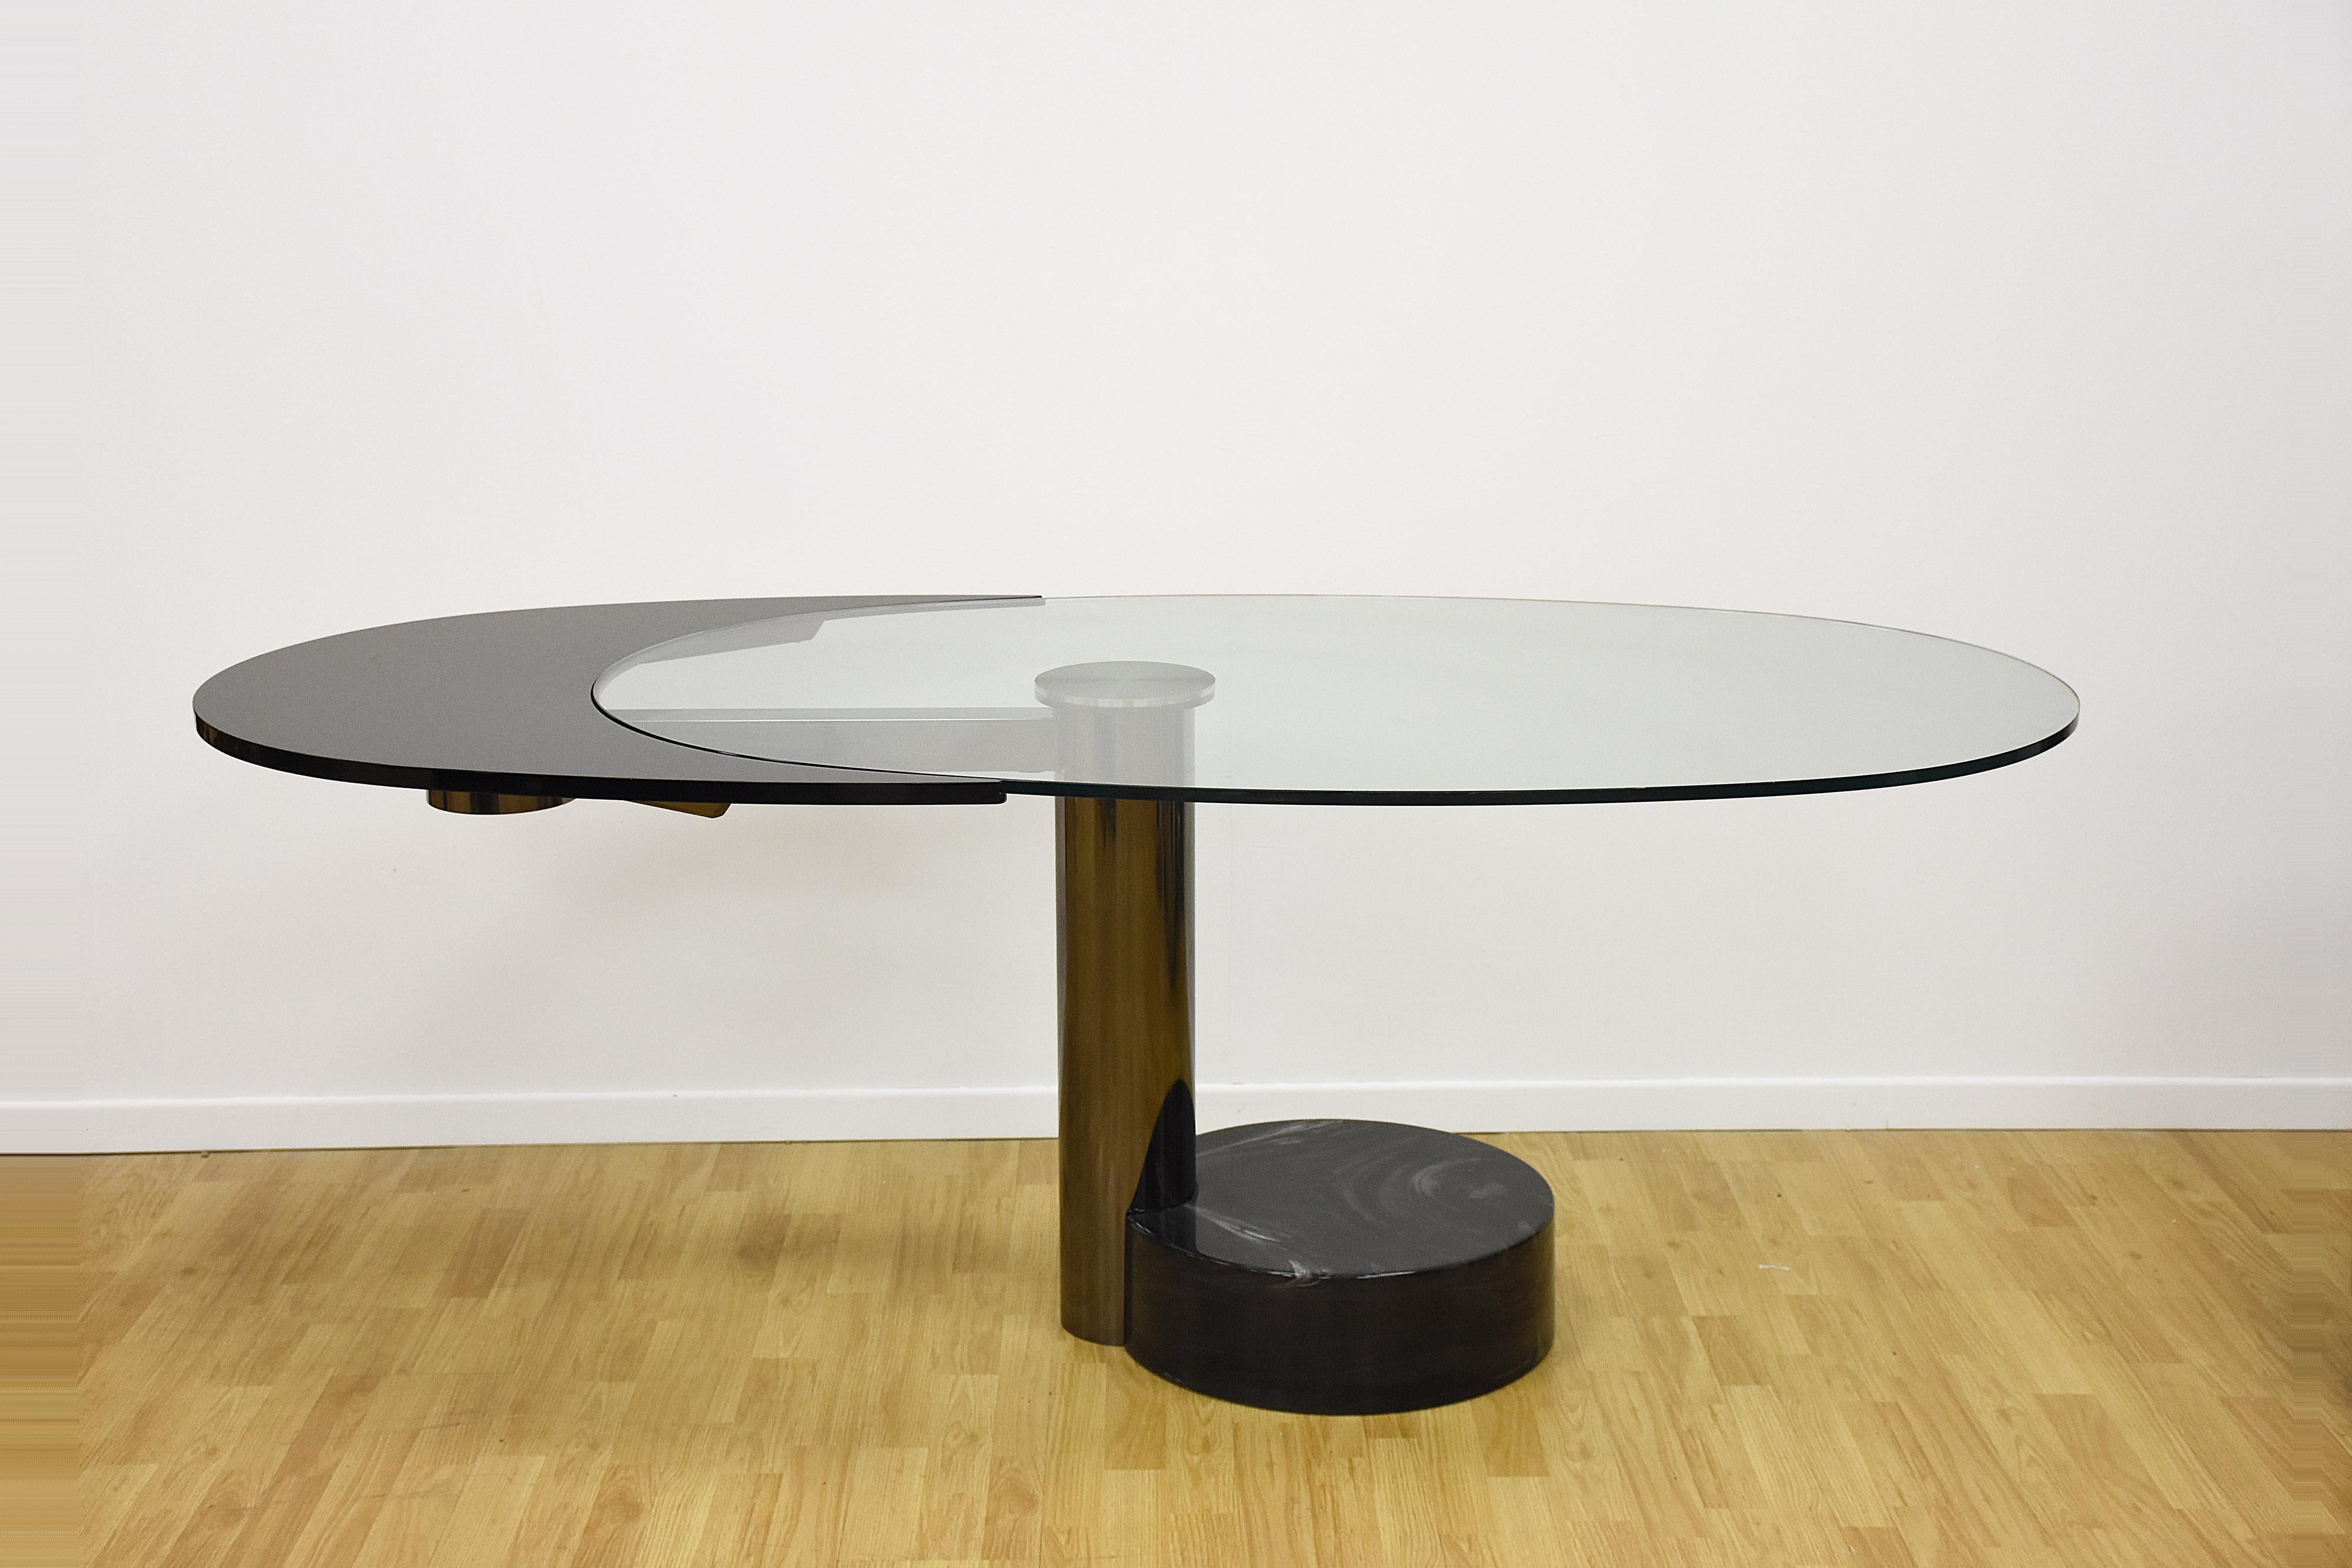 Amazing midcentury steel and glass oval revolving dining table from the 1960s, attributed to Pierre Cardin.

This incredible sculptural dining table rotates in two positions, from oval 100 x 160 cm. Once extended, the black section rises up to the